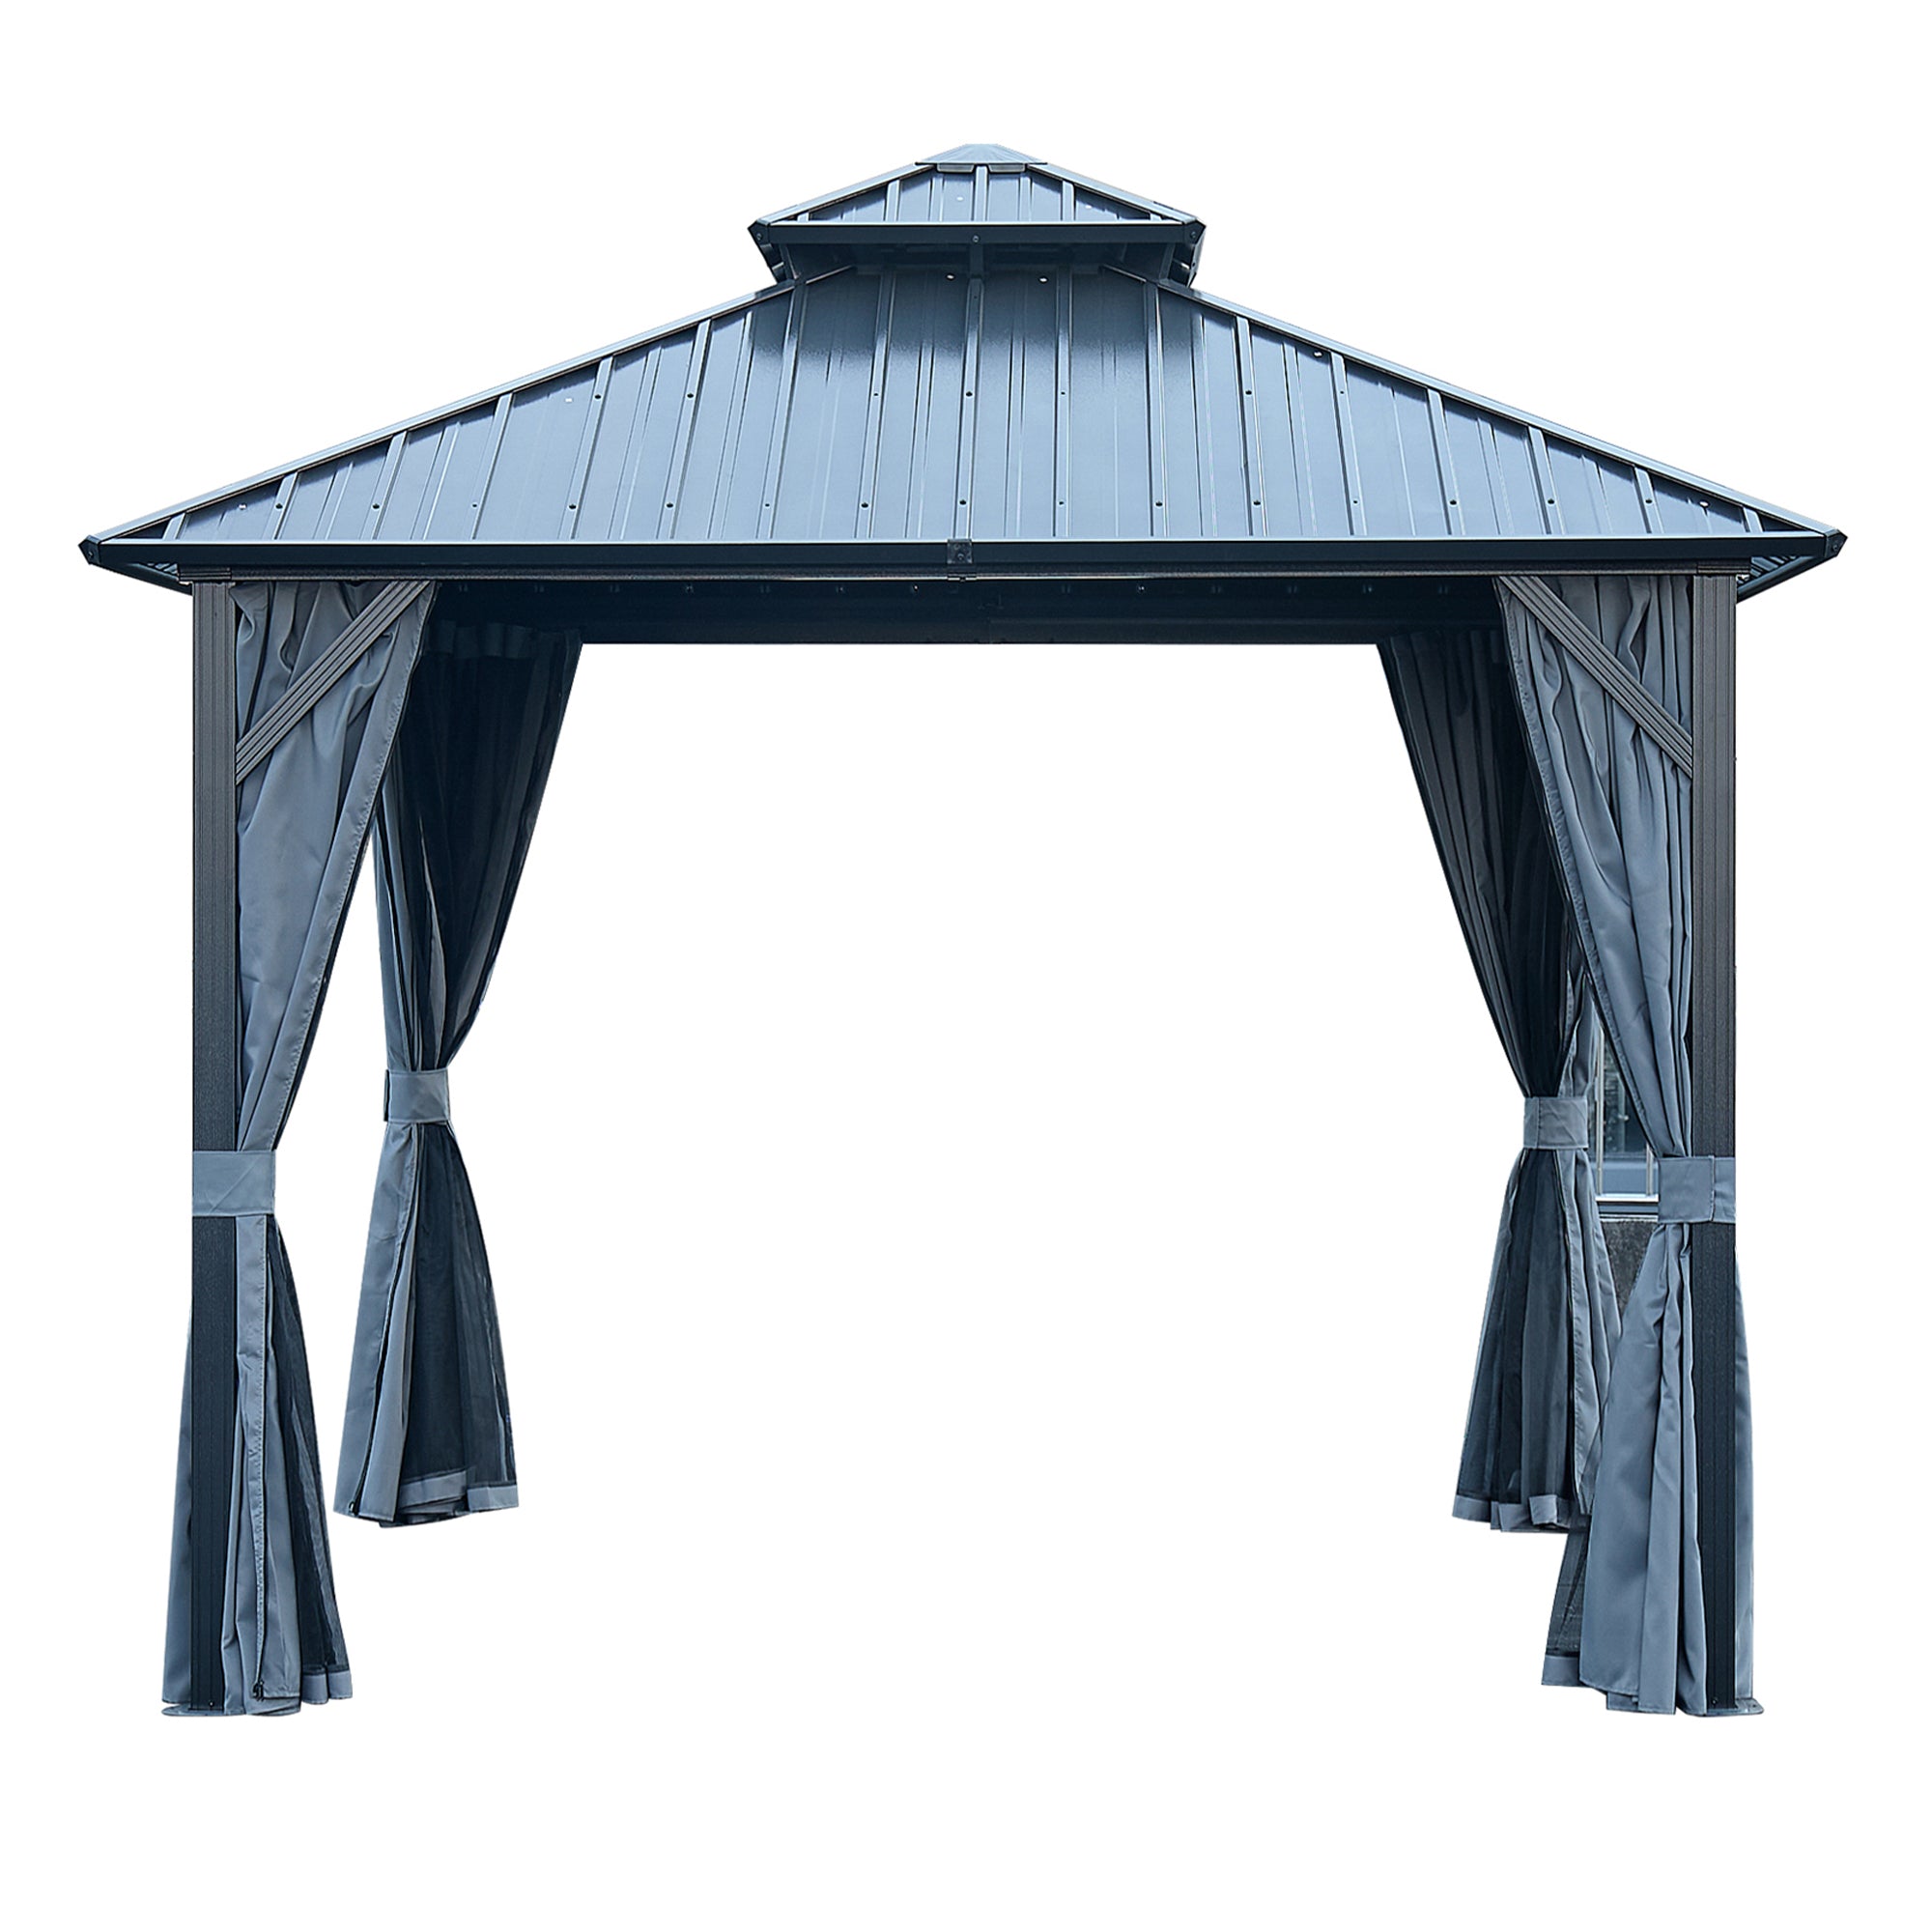 10 ft. x 10 ft. Gray Aluminum Outdoor Hardtop Patio Gazebo with Steel Canopy, Netting and Curtains    BOGASCG03GR